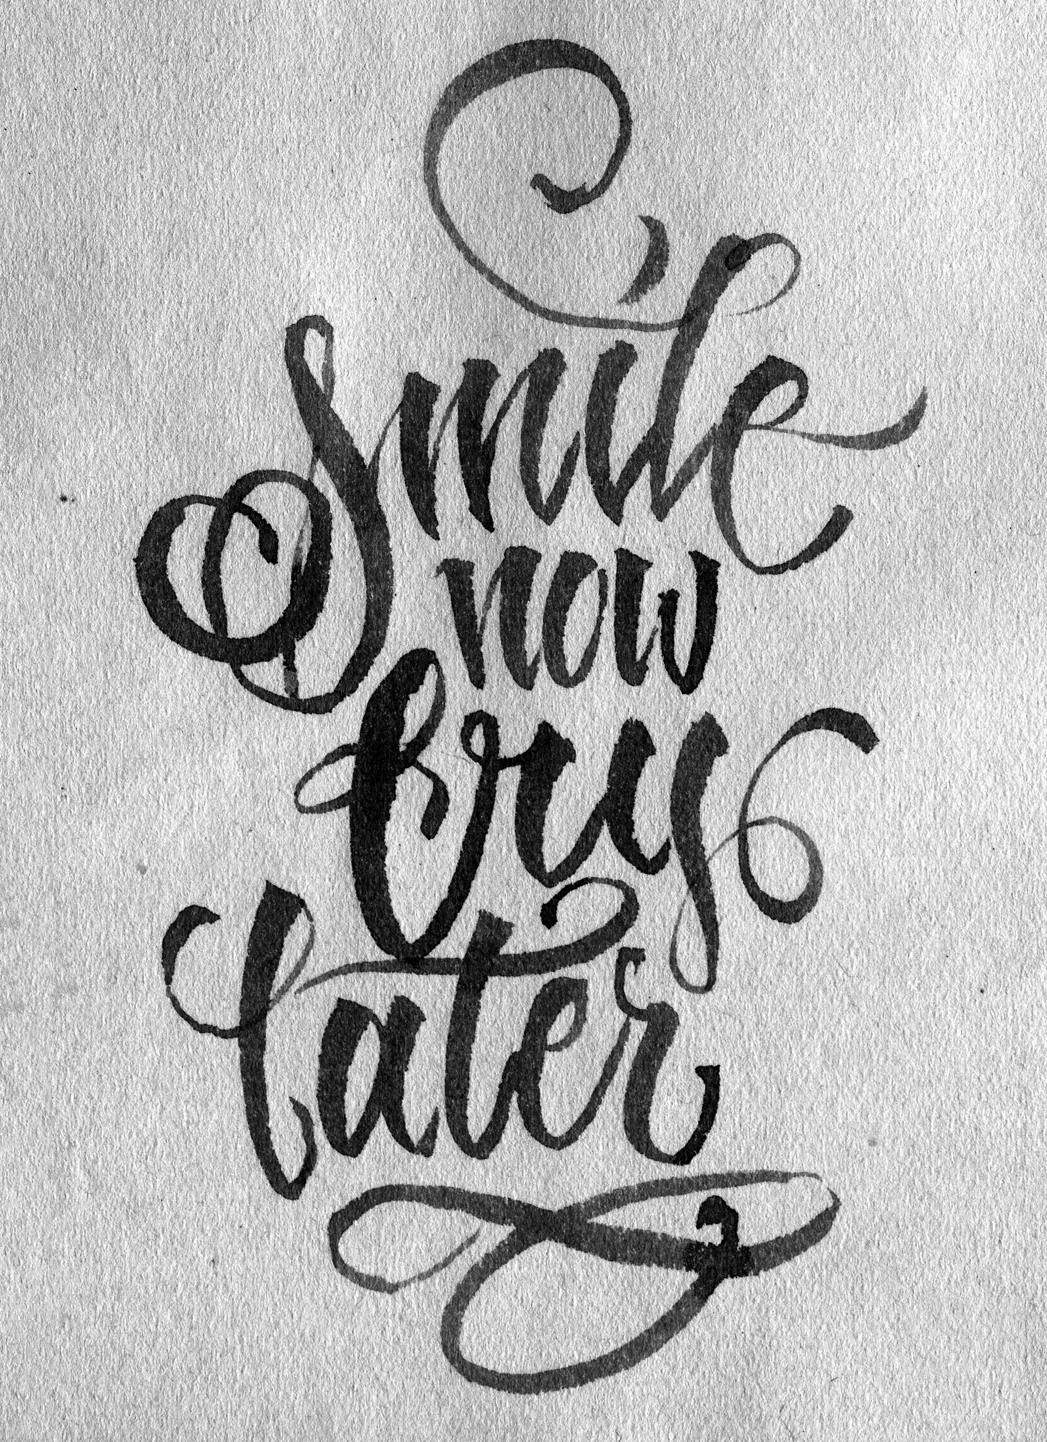 Smile Now Cry Later by Areguil on DeviantArt